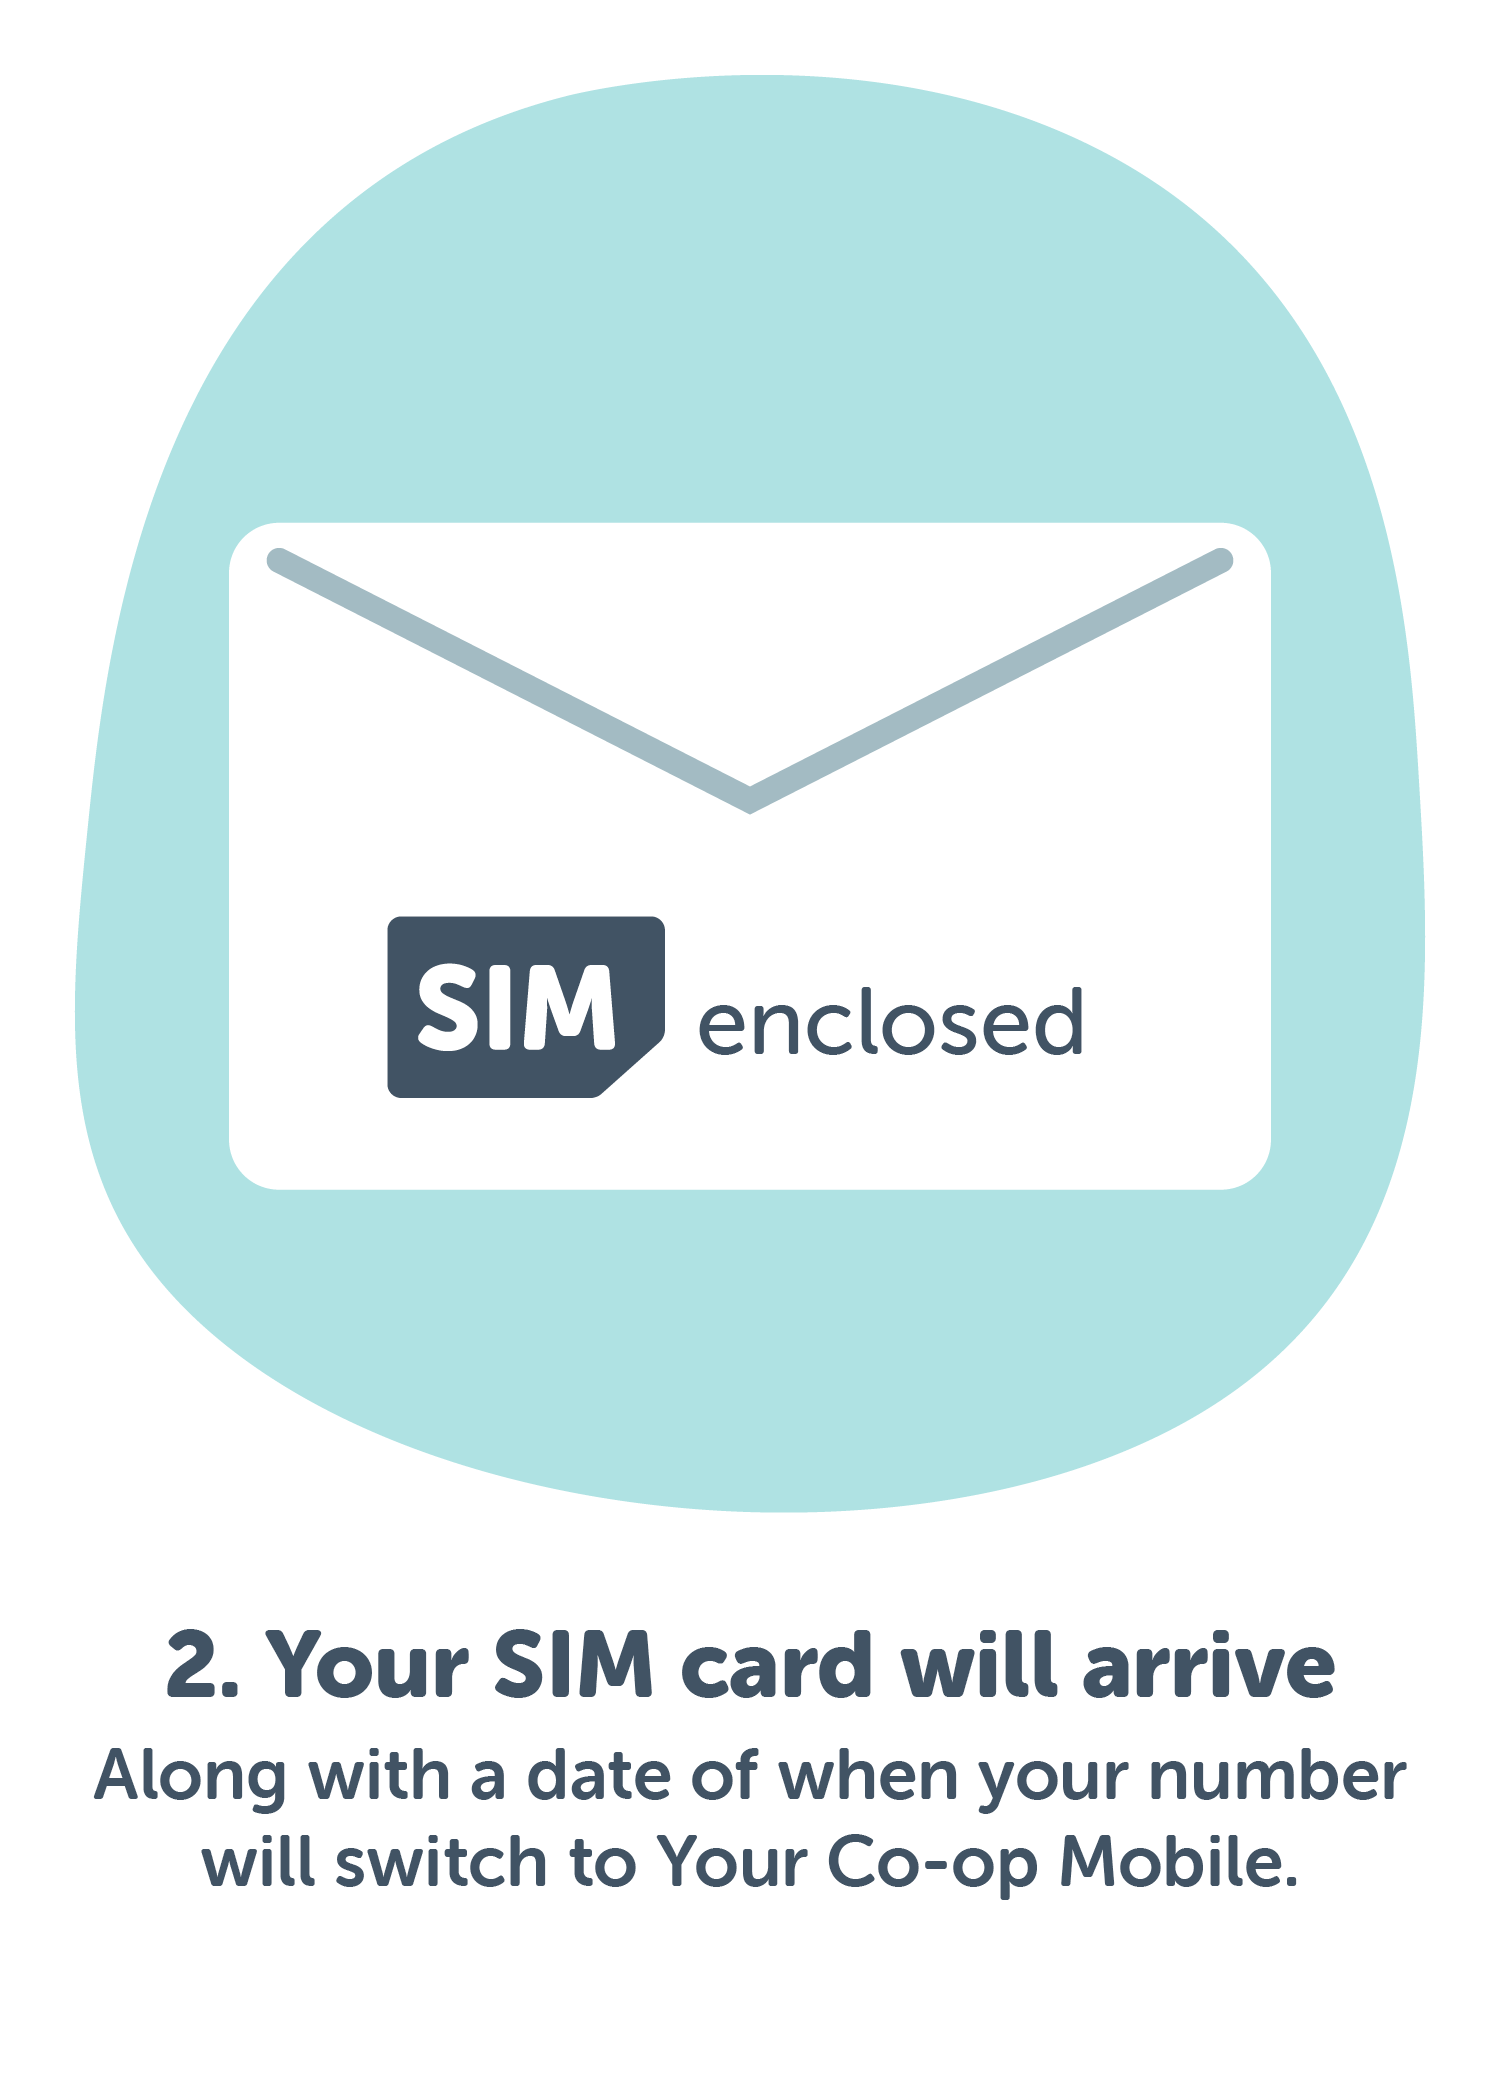 Your SIM card will arrive